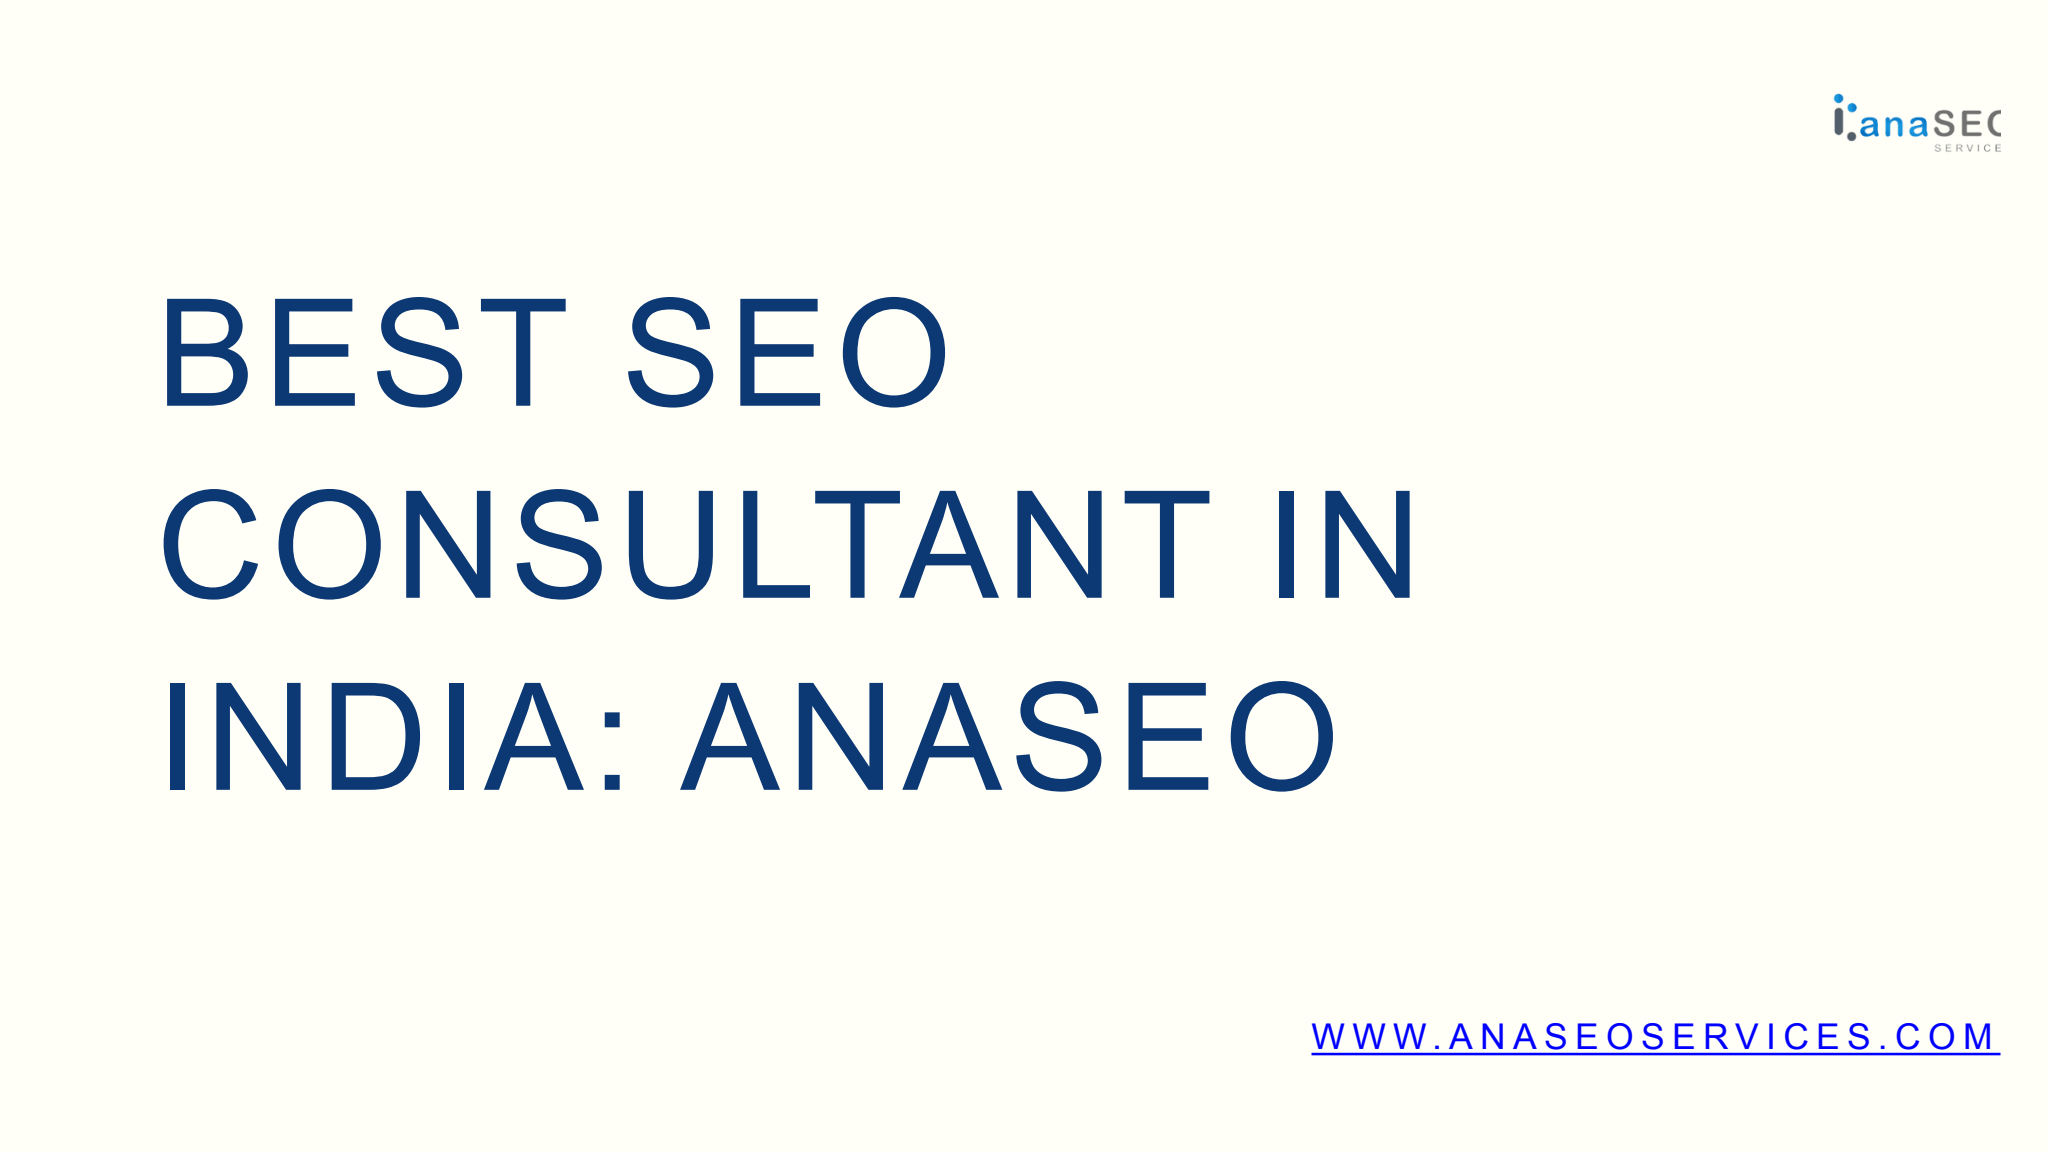 Dropbox - Best SEO Consultant in India AnaSEO.pptx - Simplify your life